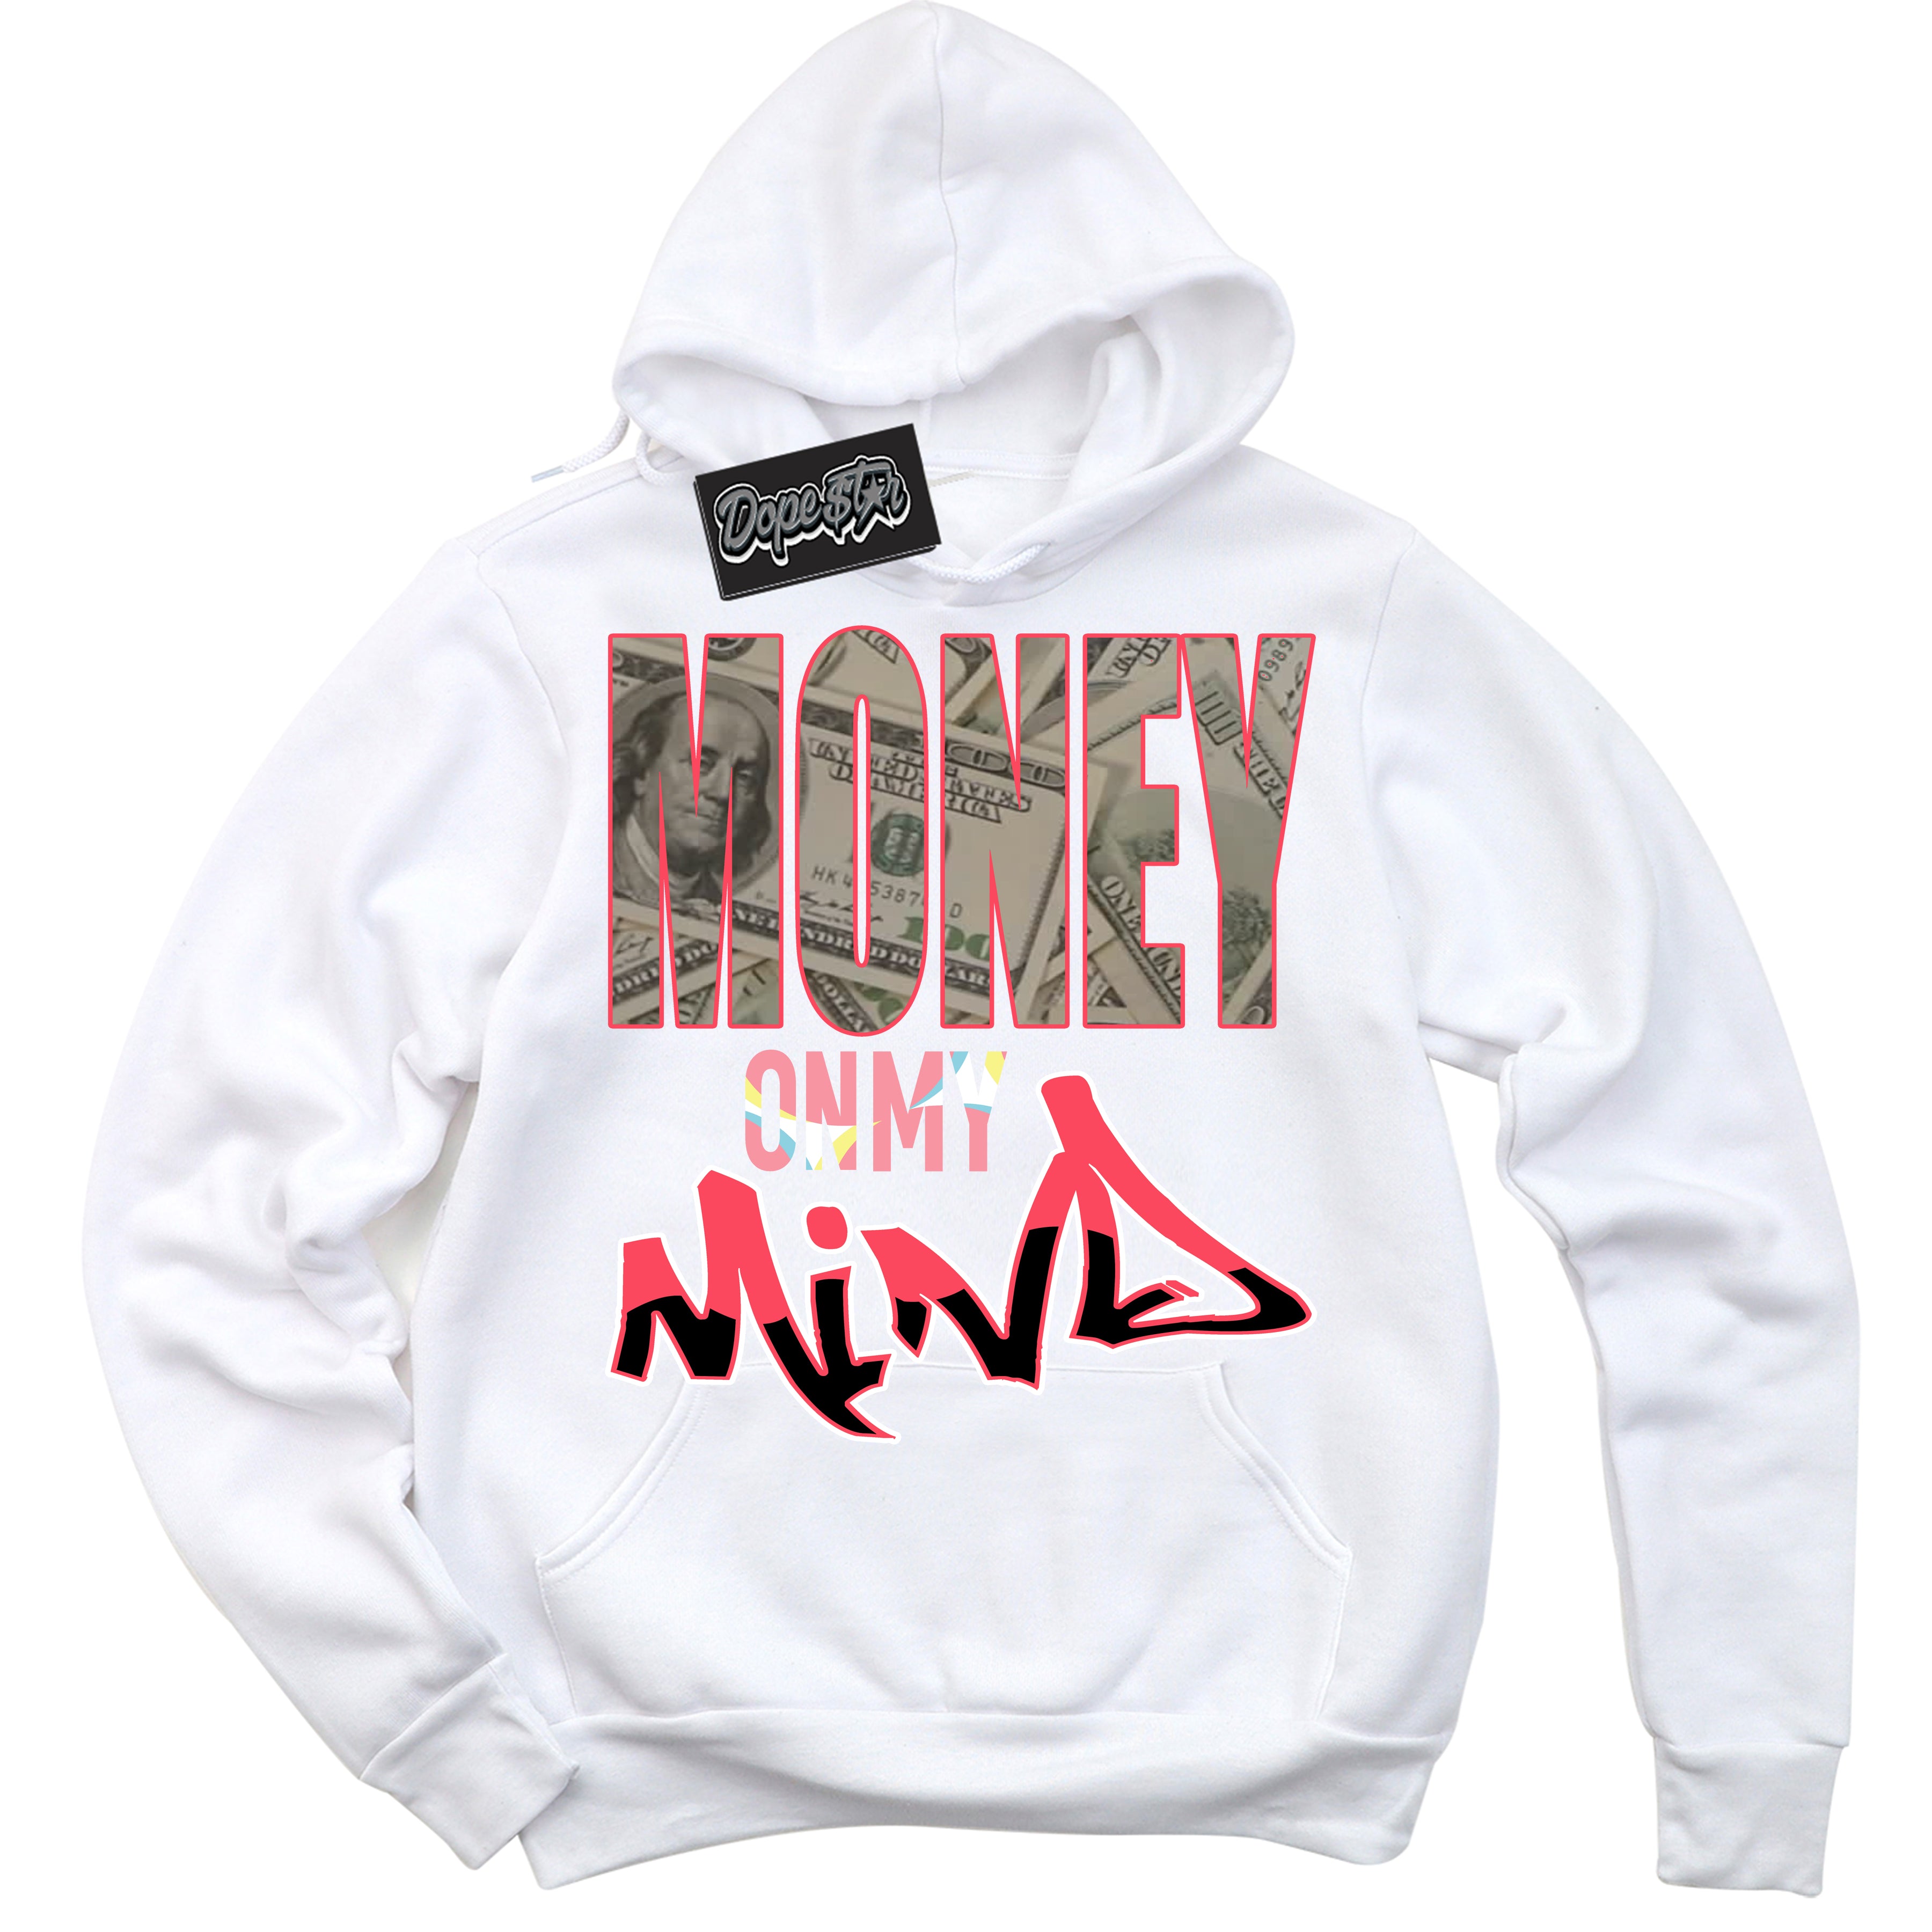 Cool White Graphic DopeStar Hoodie with “ Money On My Mind “ print, that perfectly matches Spider-Verse 1s sneakers